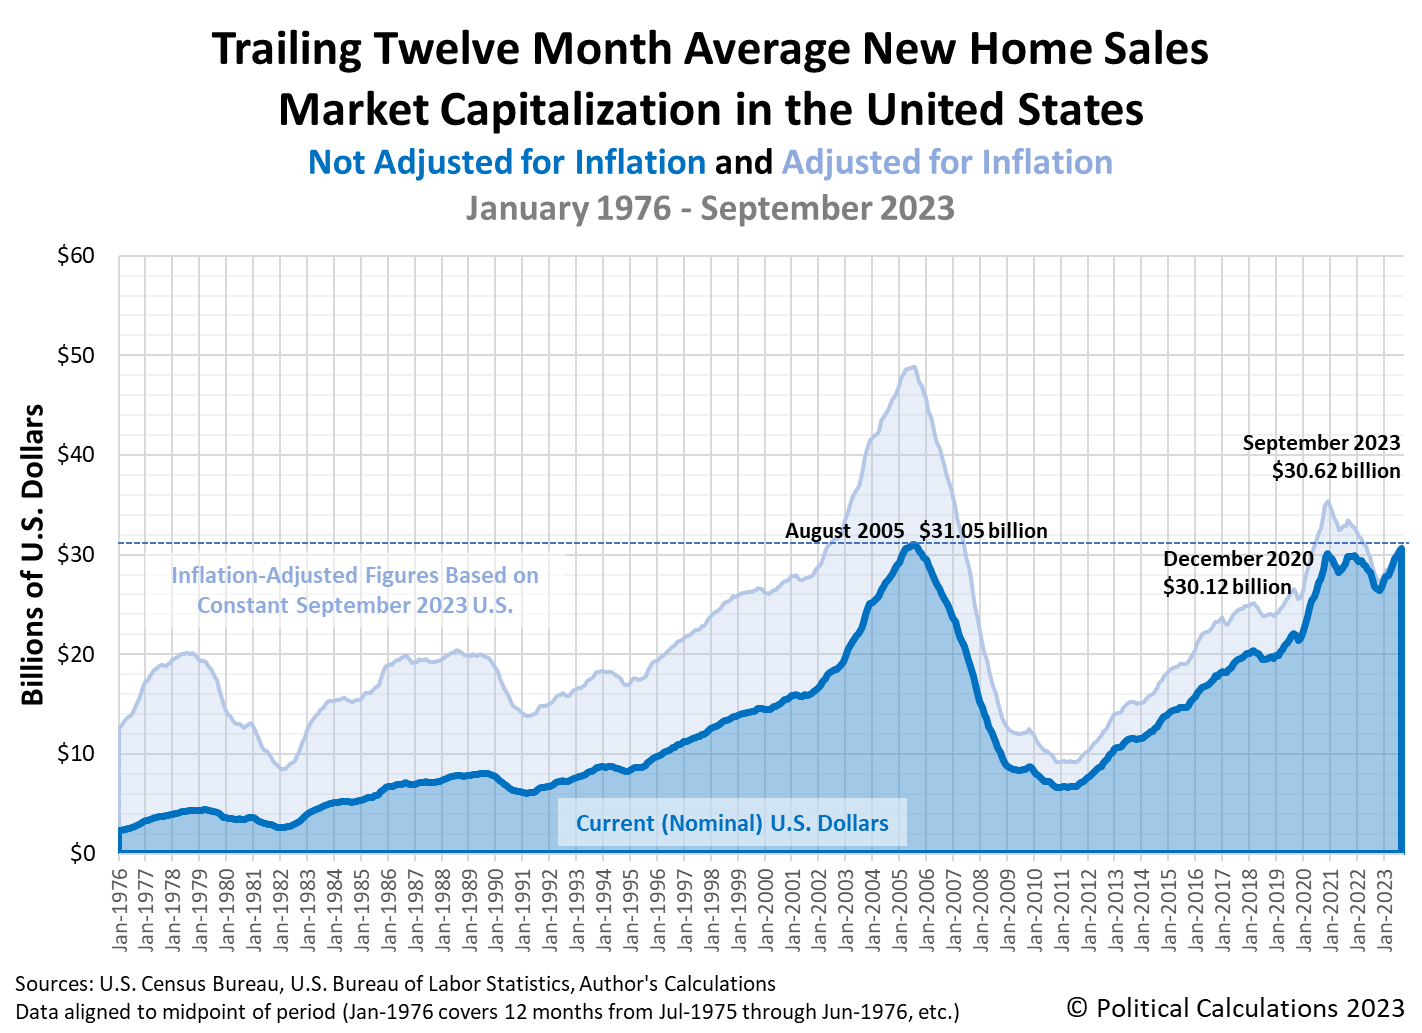 Trailing Twelve Month Average New Home Sales Market Capitalization in the United States, January 1976 - September 2023